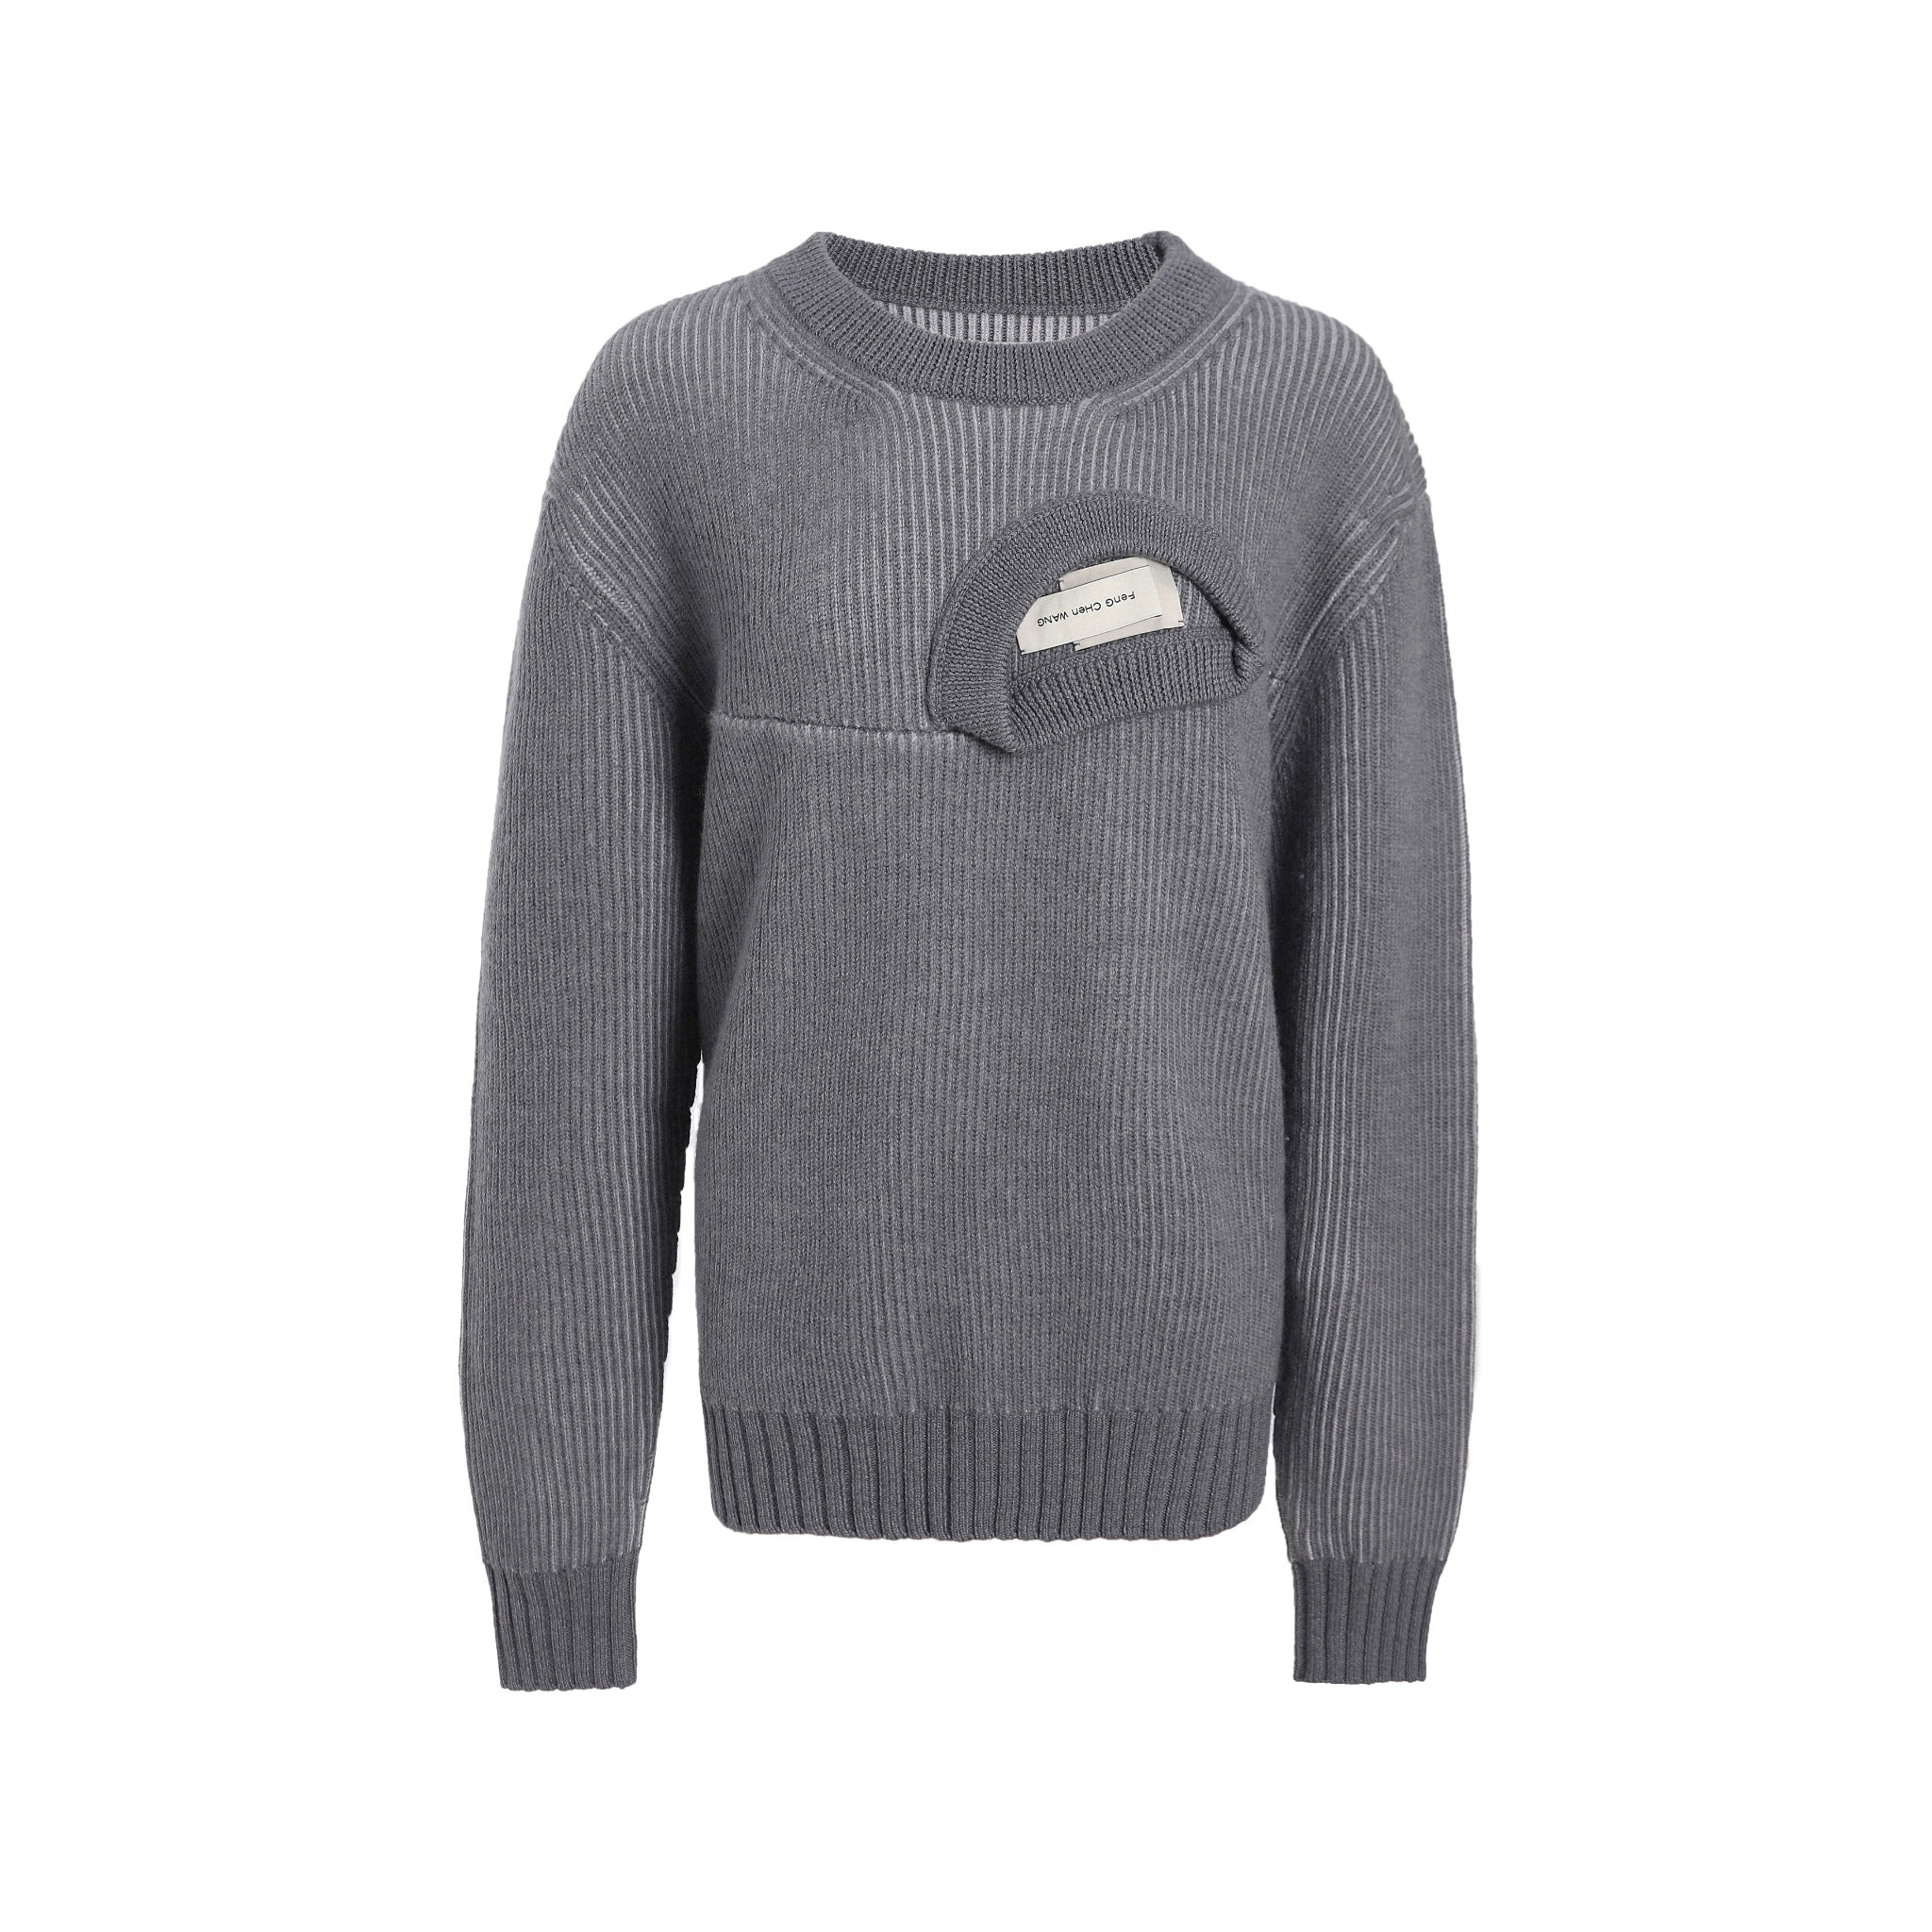 FENGCHEN WANG 2 In 1 Pullover Sweater Grey | MADA IN CHINA